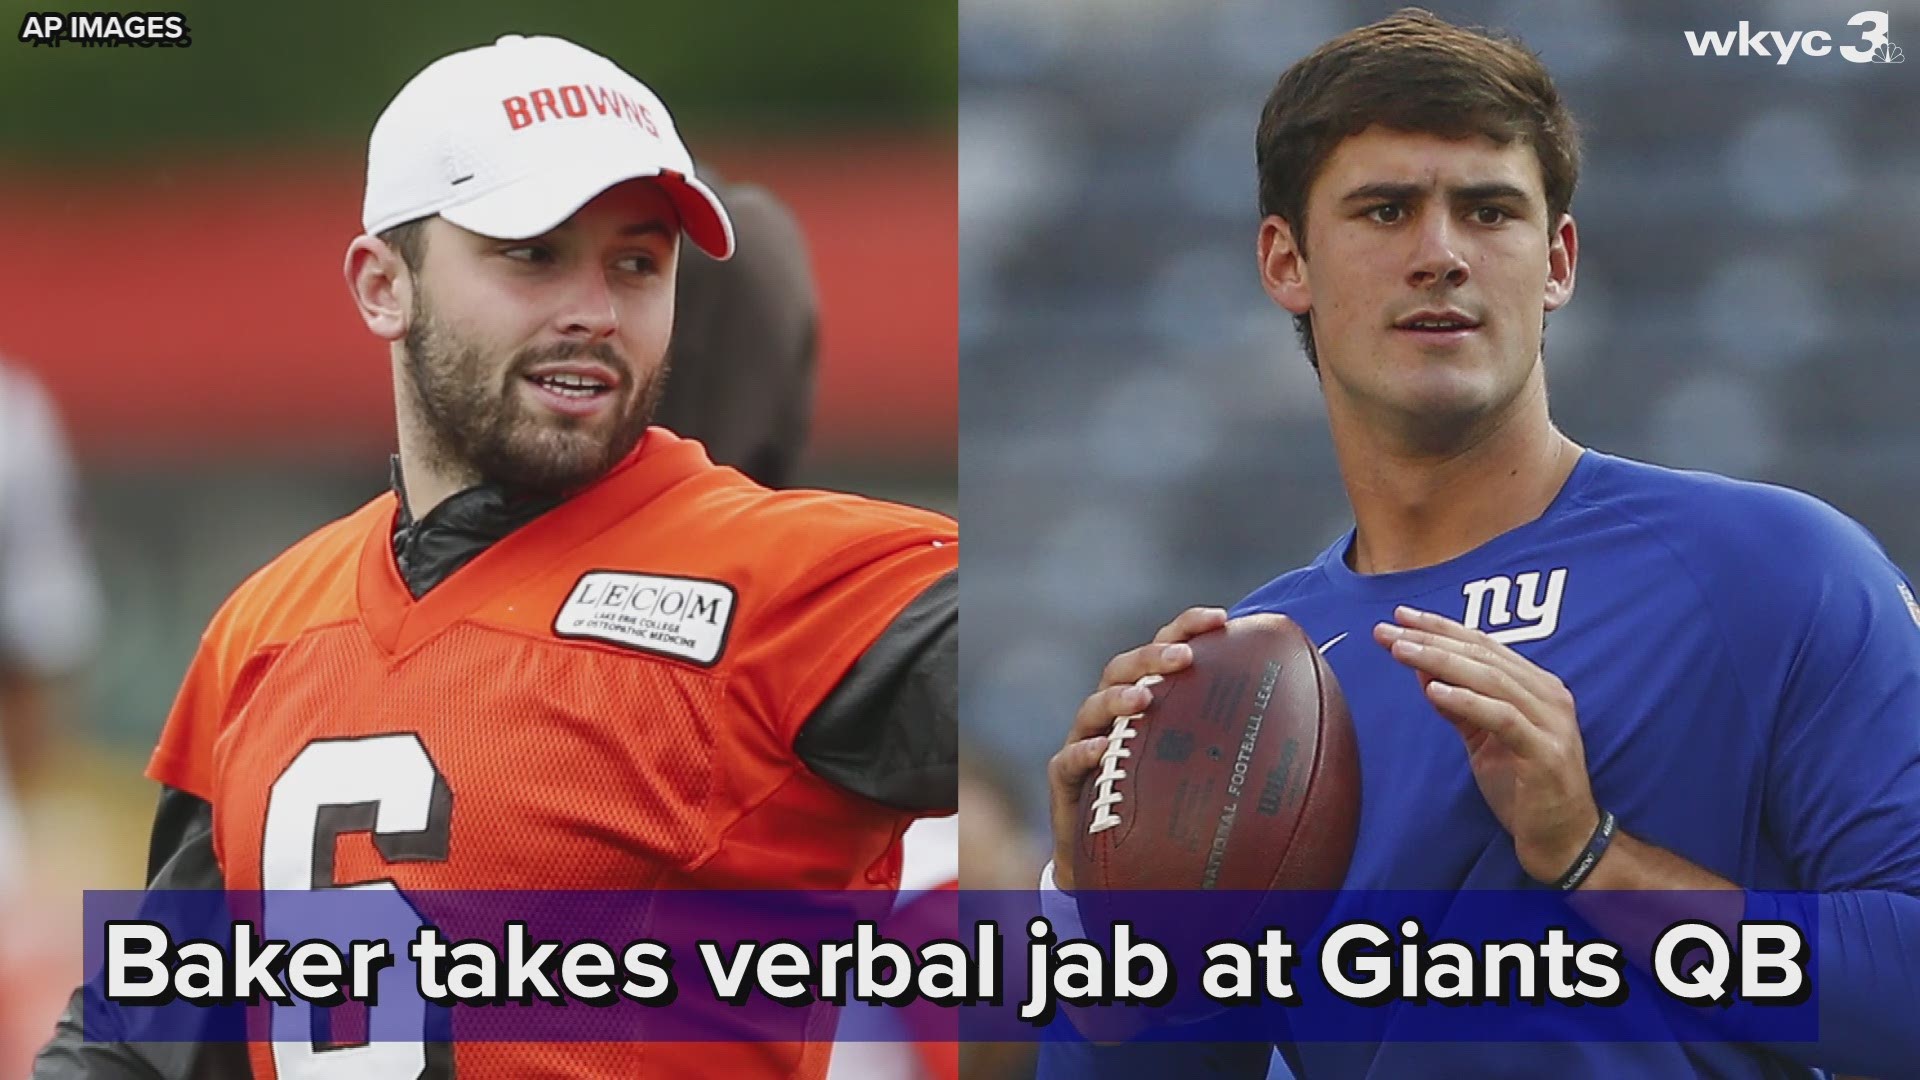 In an interview with GQ, Cleveland Browns quarterback Baker Mayfield said it 'blows my mind' that the New York Giants drafted Daniel Jones.